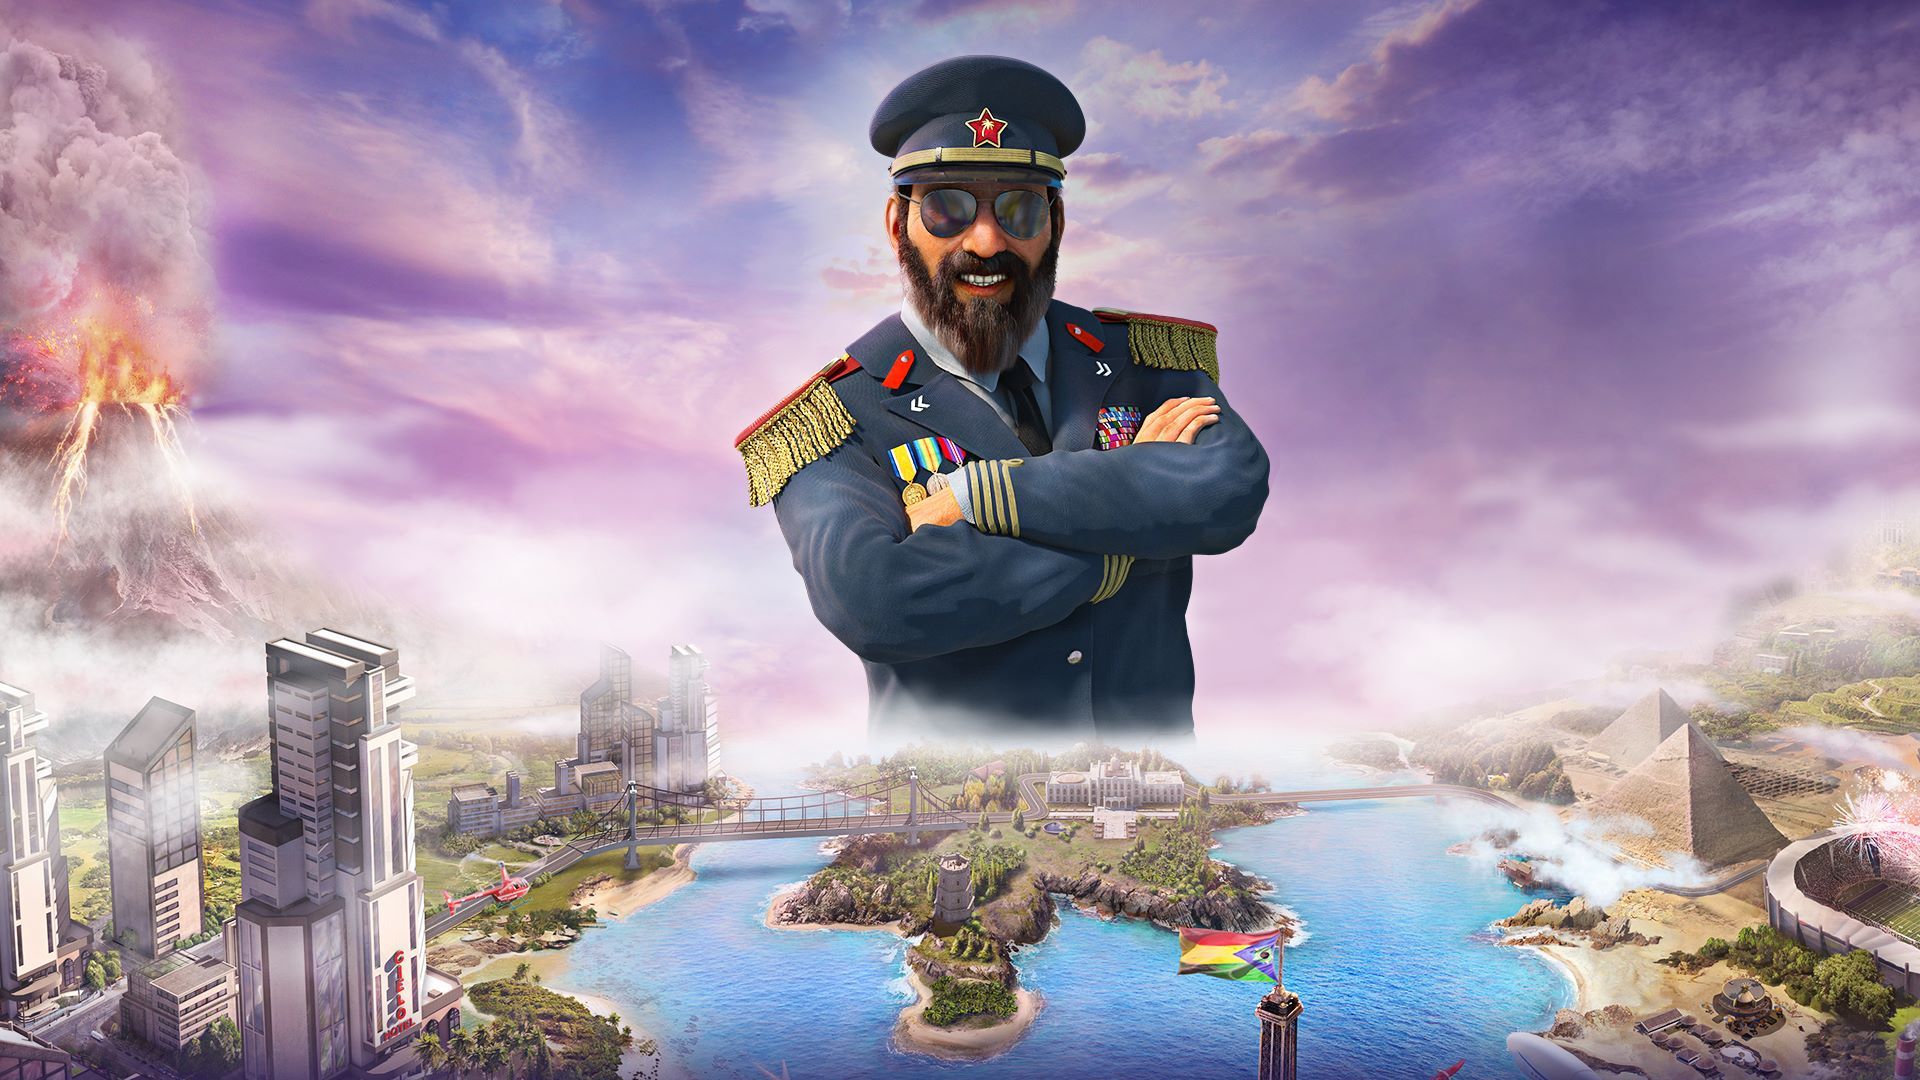 Tropica 6 reaches new levels of corruption in The Llama of Wall Street